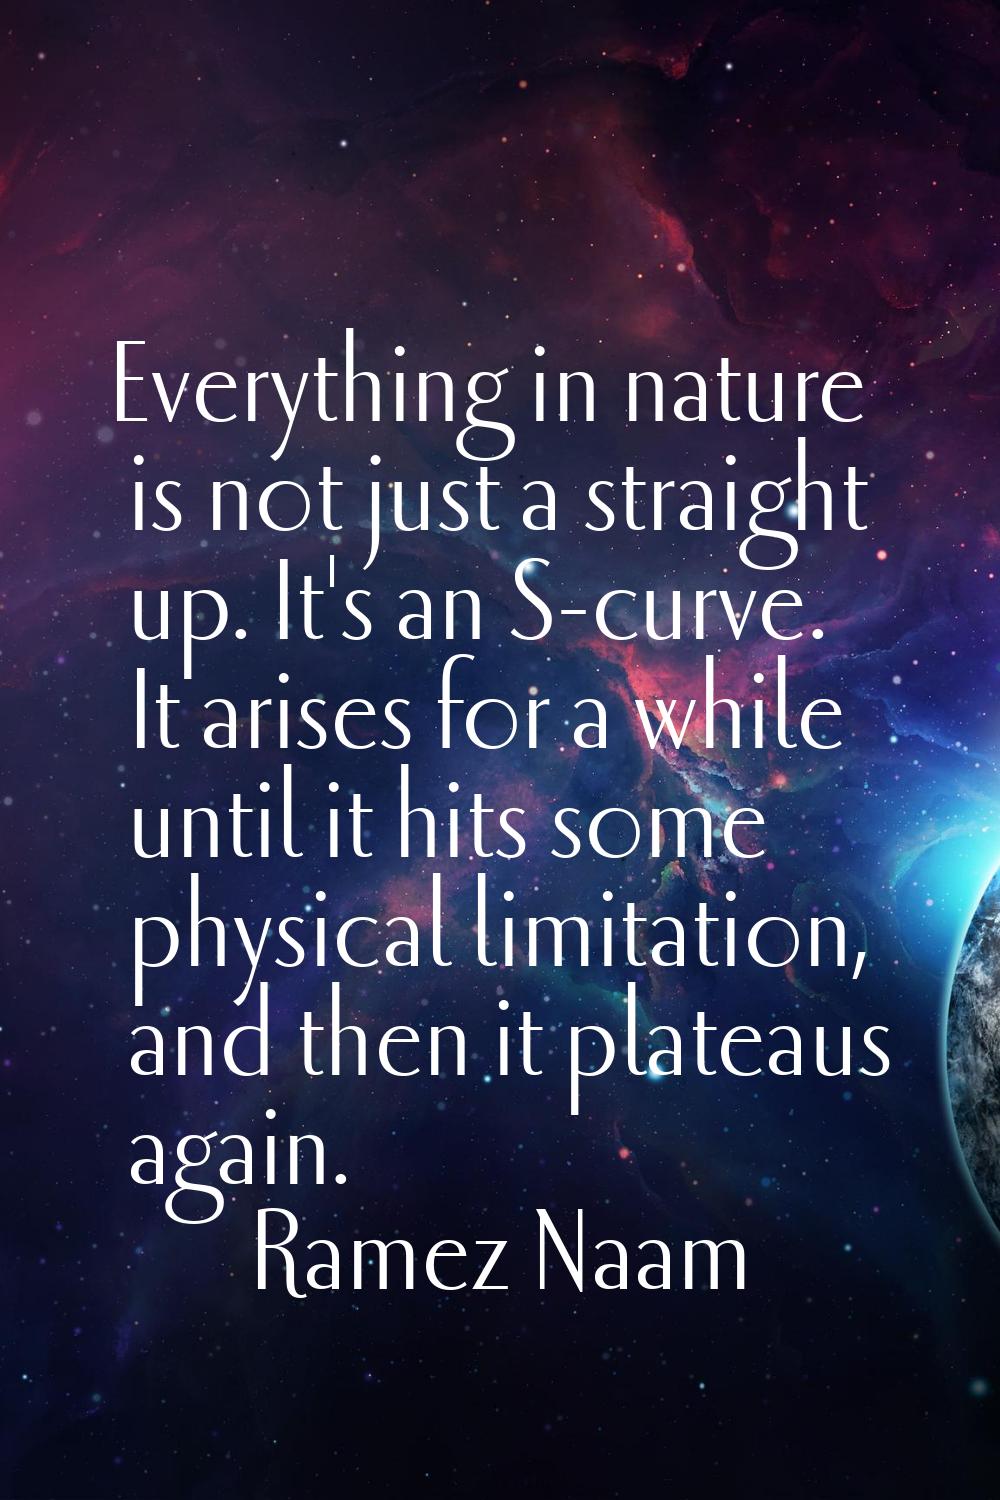 Everything in nature is not just a straight up. It's an S-curve. It arises for a while until it hit